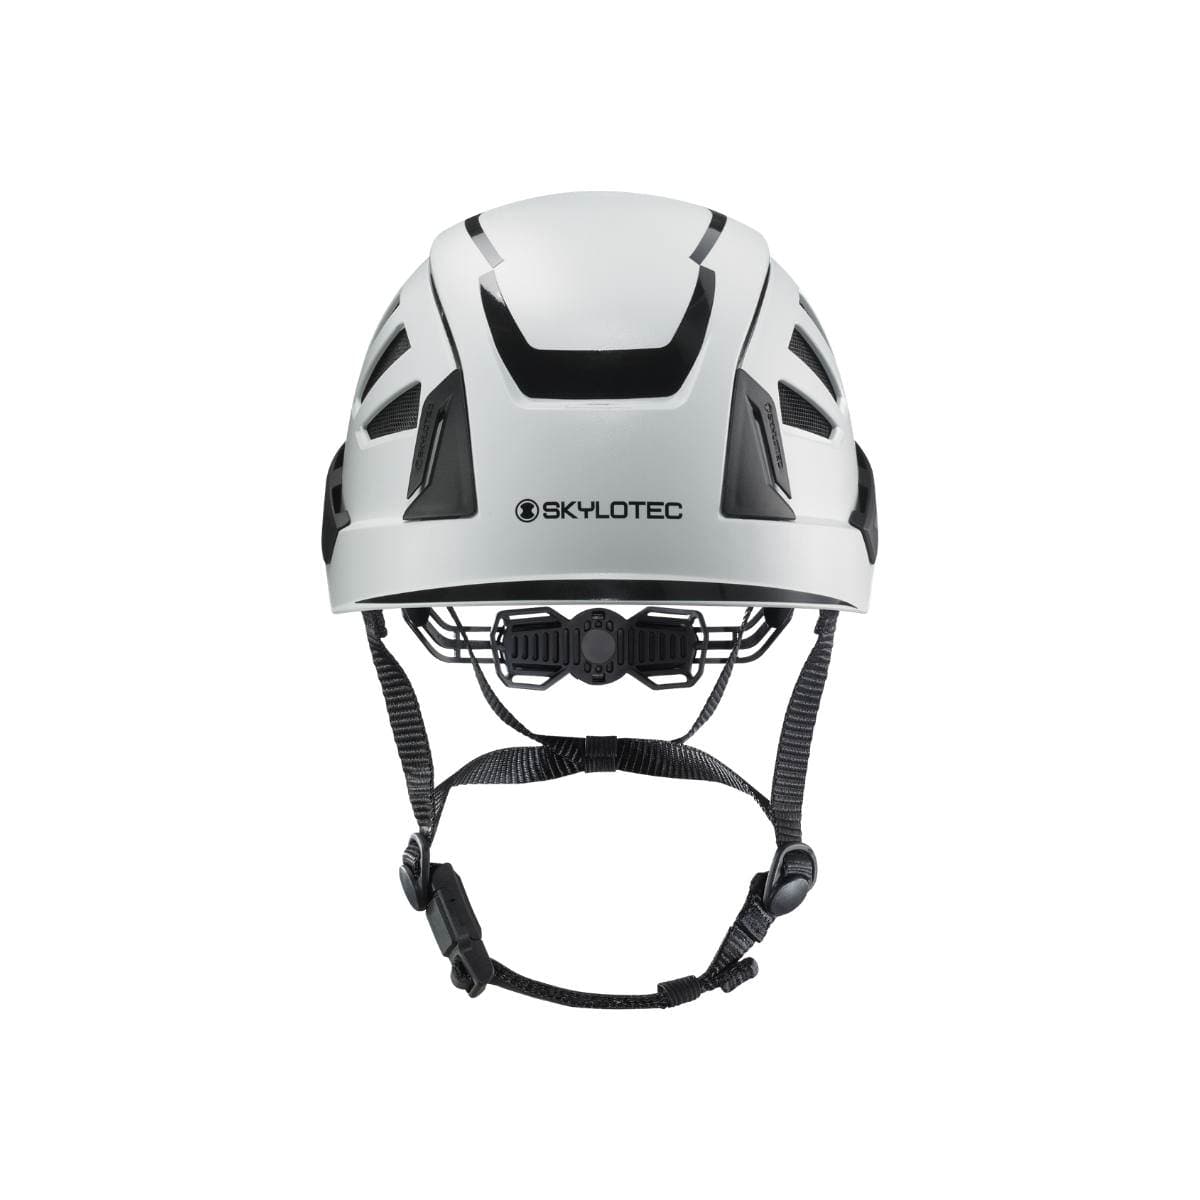 Skylotec Inceptor GRX Vented White Reflective BE-AUS-391-12